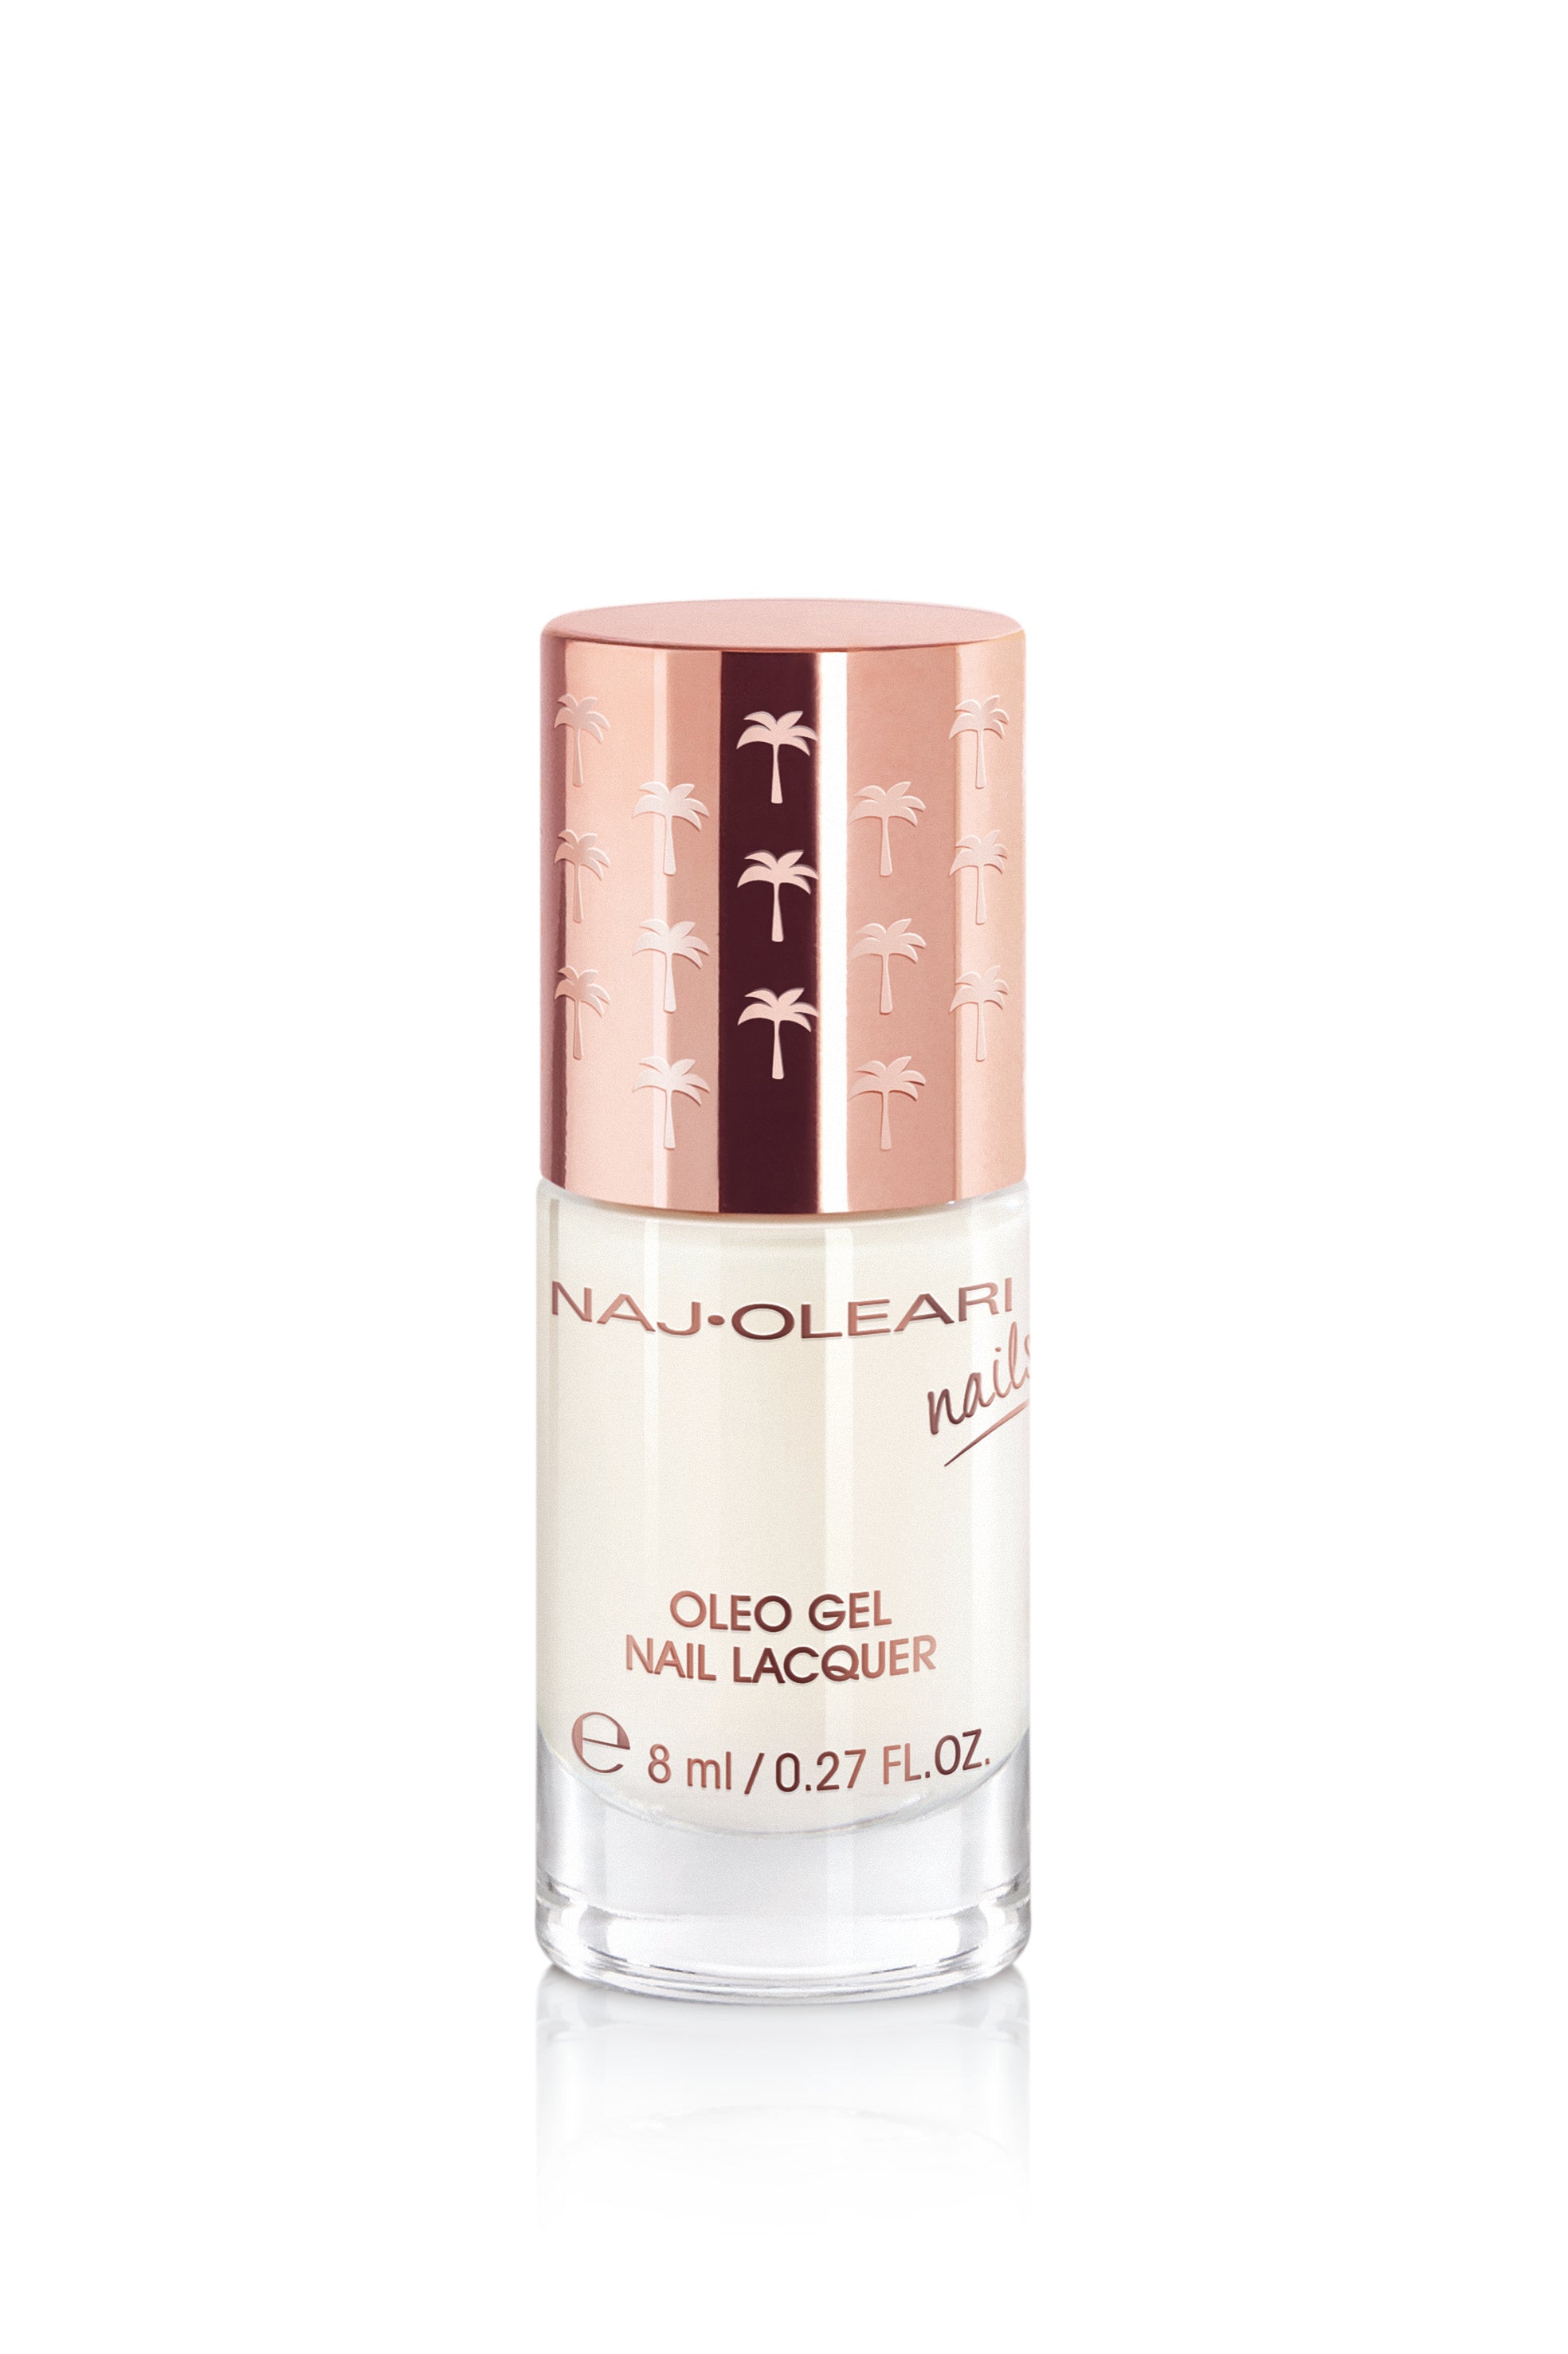 Oleo Gel Nail Lacquer